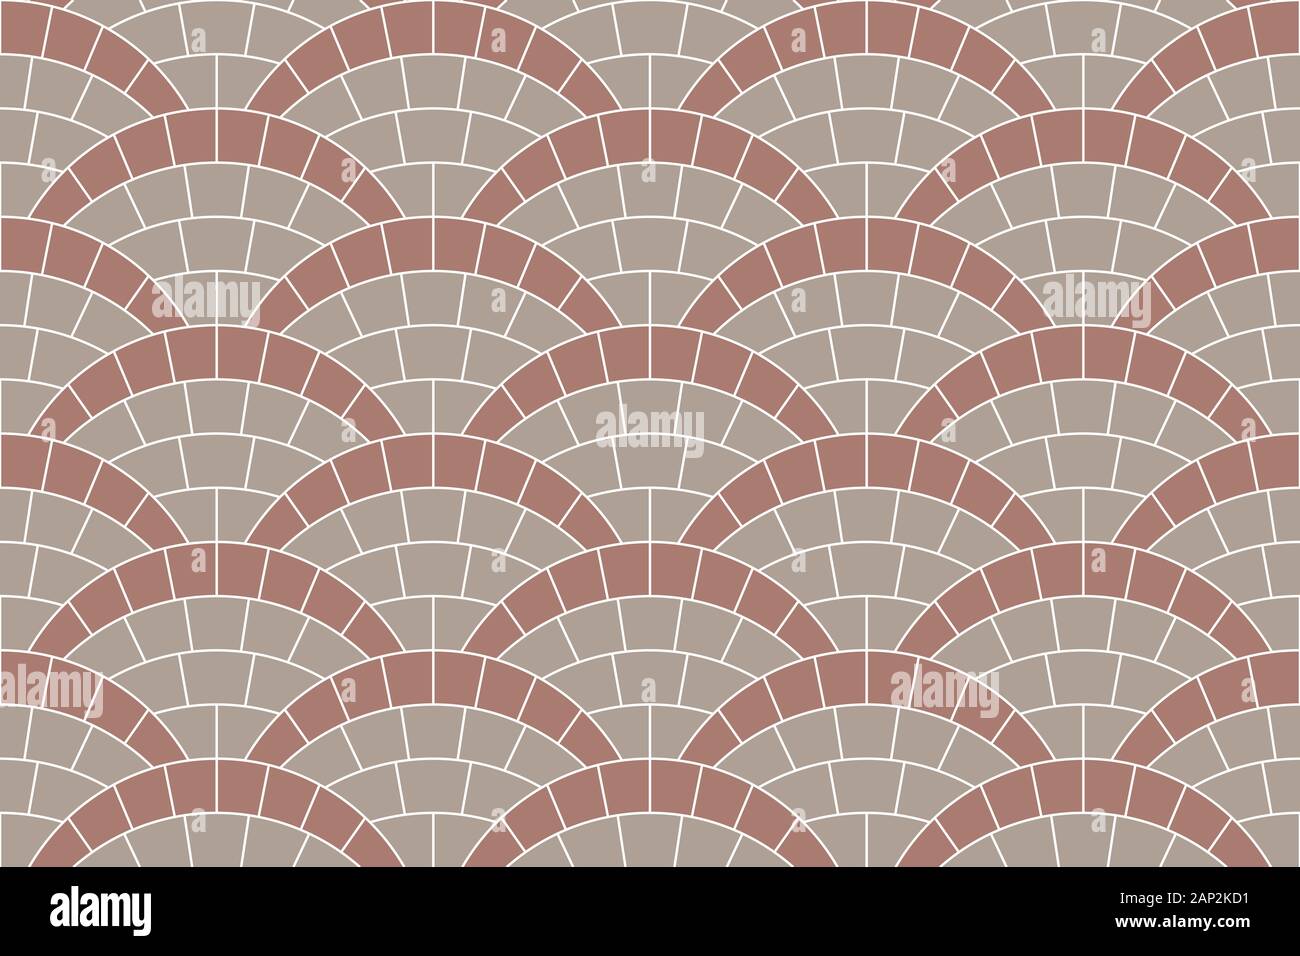 Seamless texture of circle street tiles pavement. Repeating pattern of radial mosaic background Stock Photo